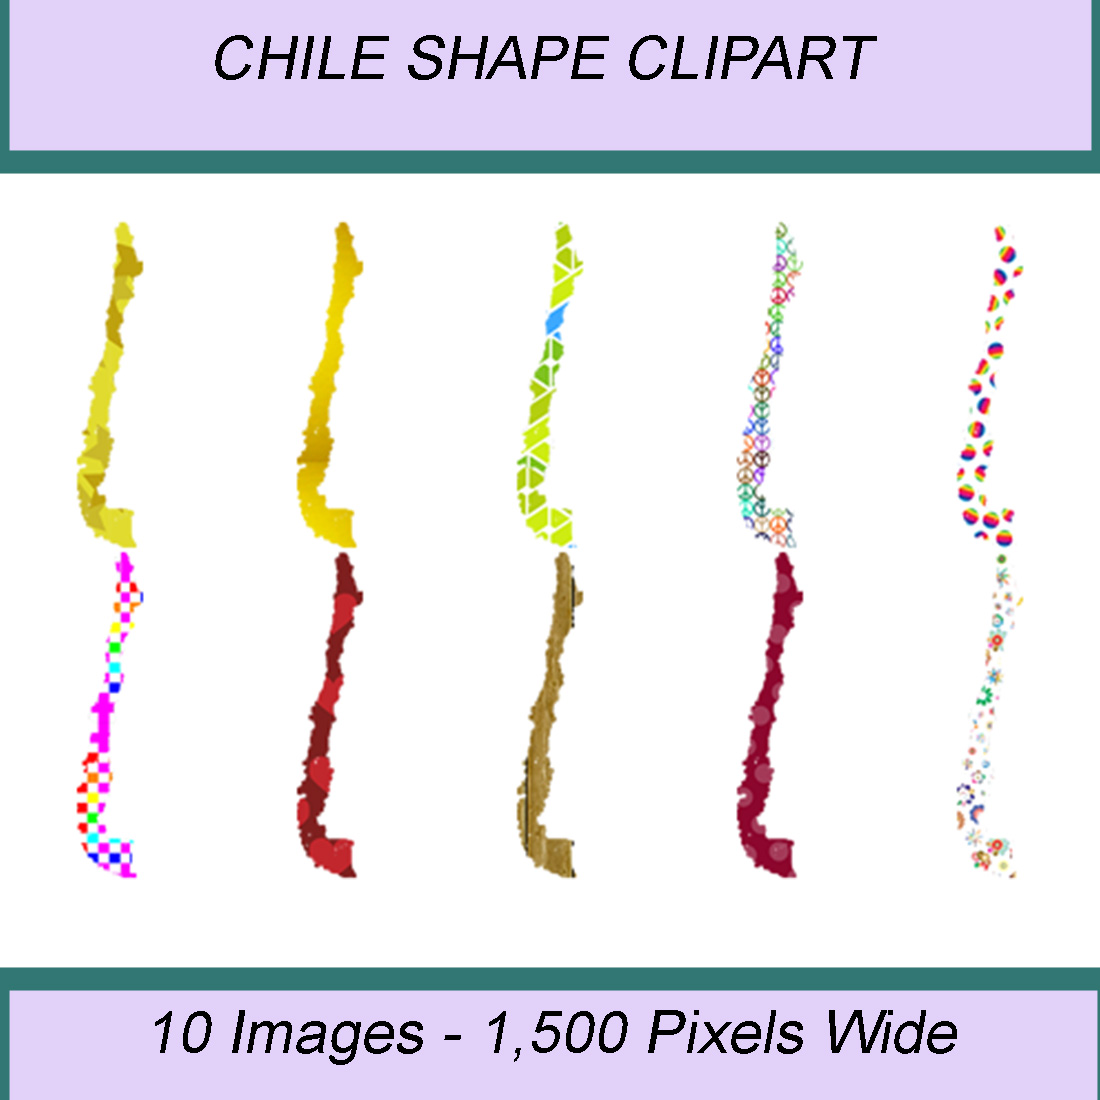 CHILE SHAPE CLIPART ICONS cover image.